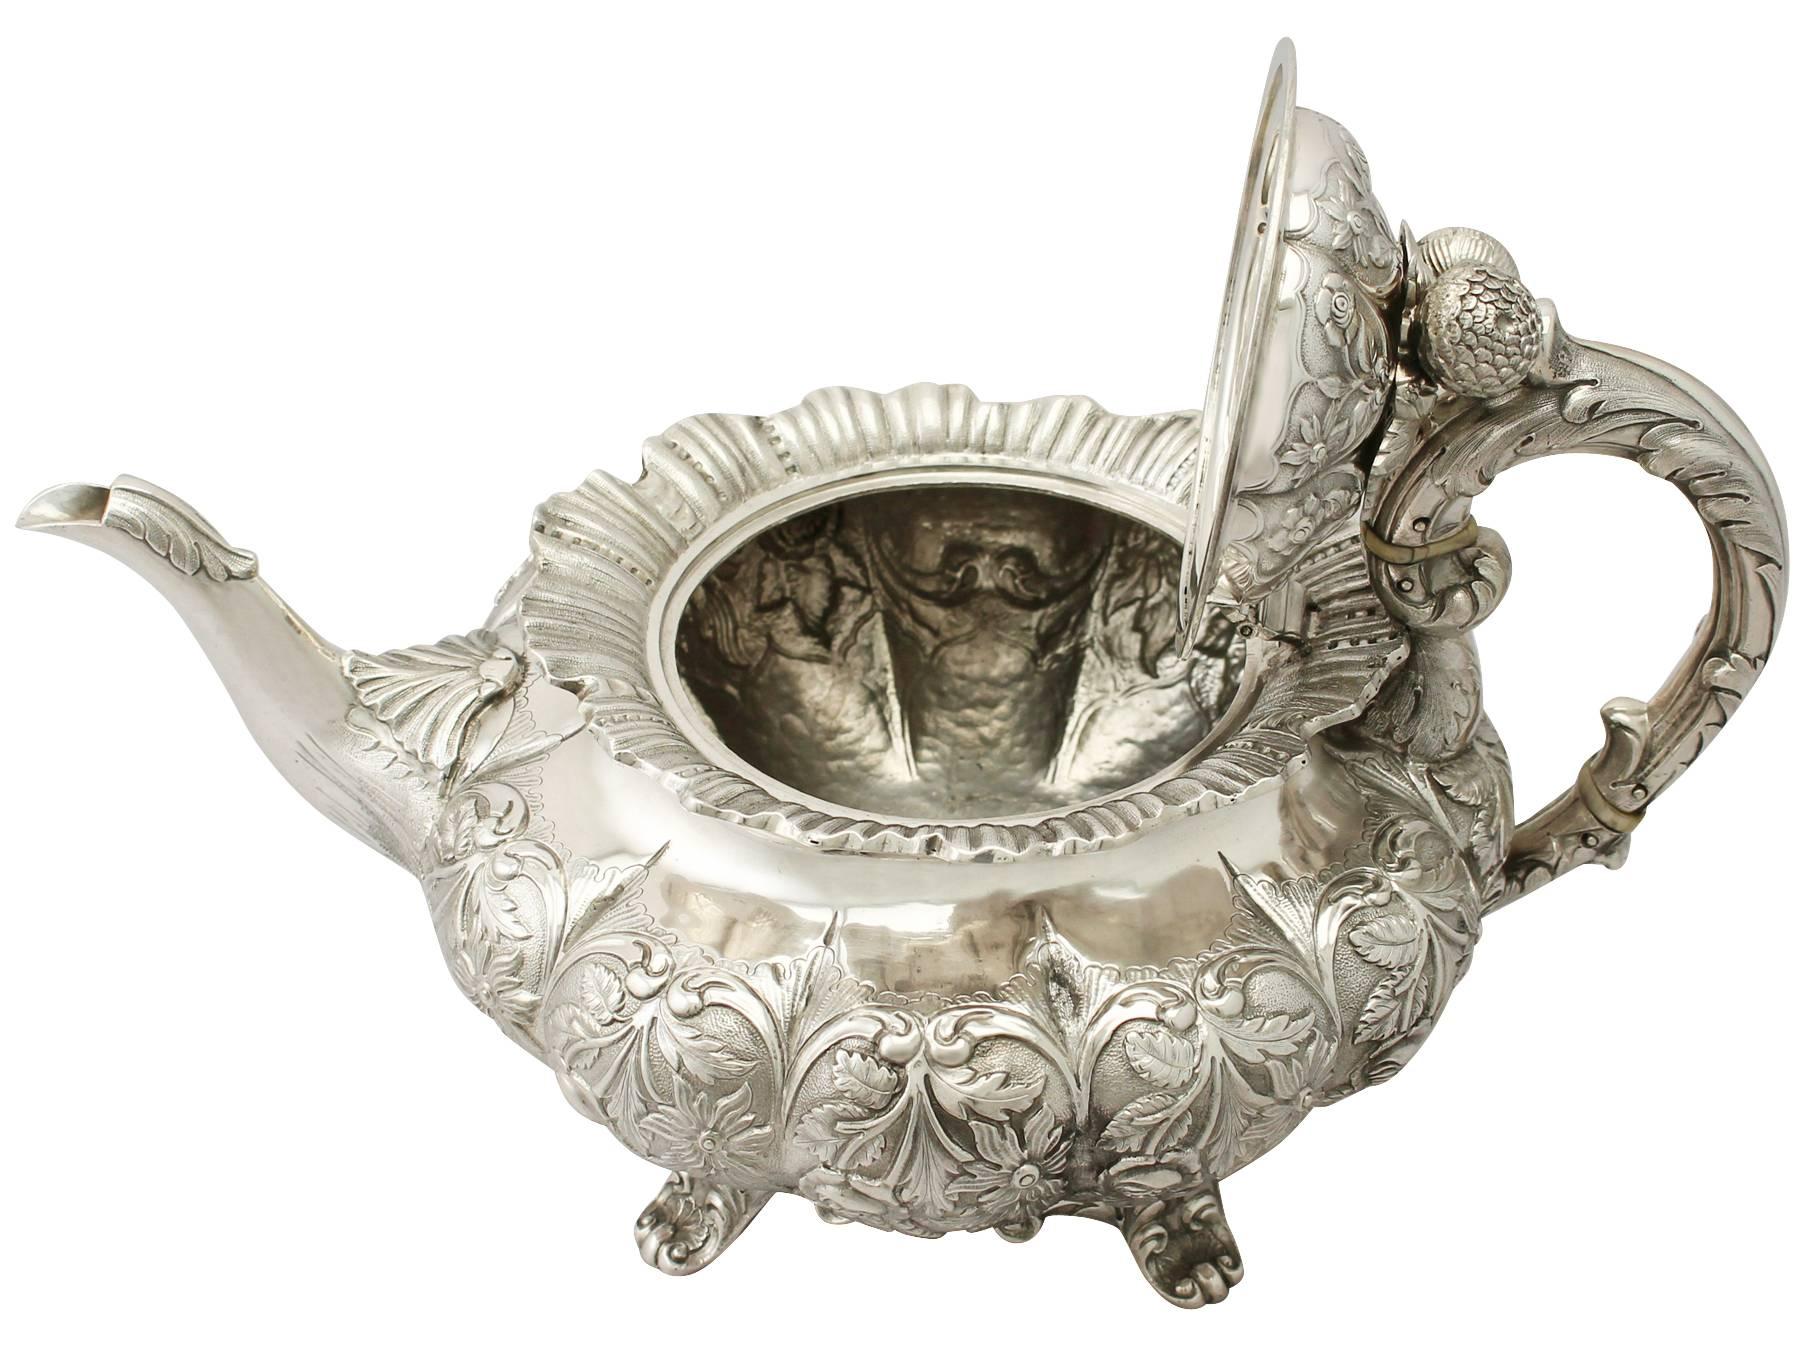 A magnificent, fine and impressive antique Indian colonial silver teapot; an addition to our silver teaware collection.

This magnificent antique Indian colonial silver teapot has a compressed melon shaped form.

The surface of the teapot is